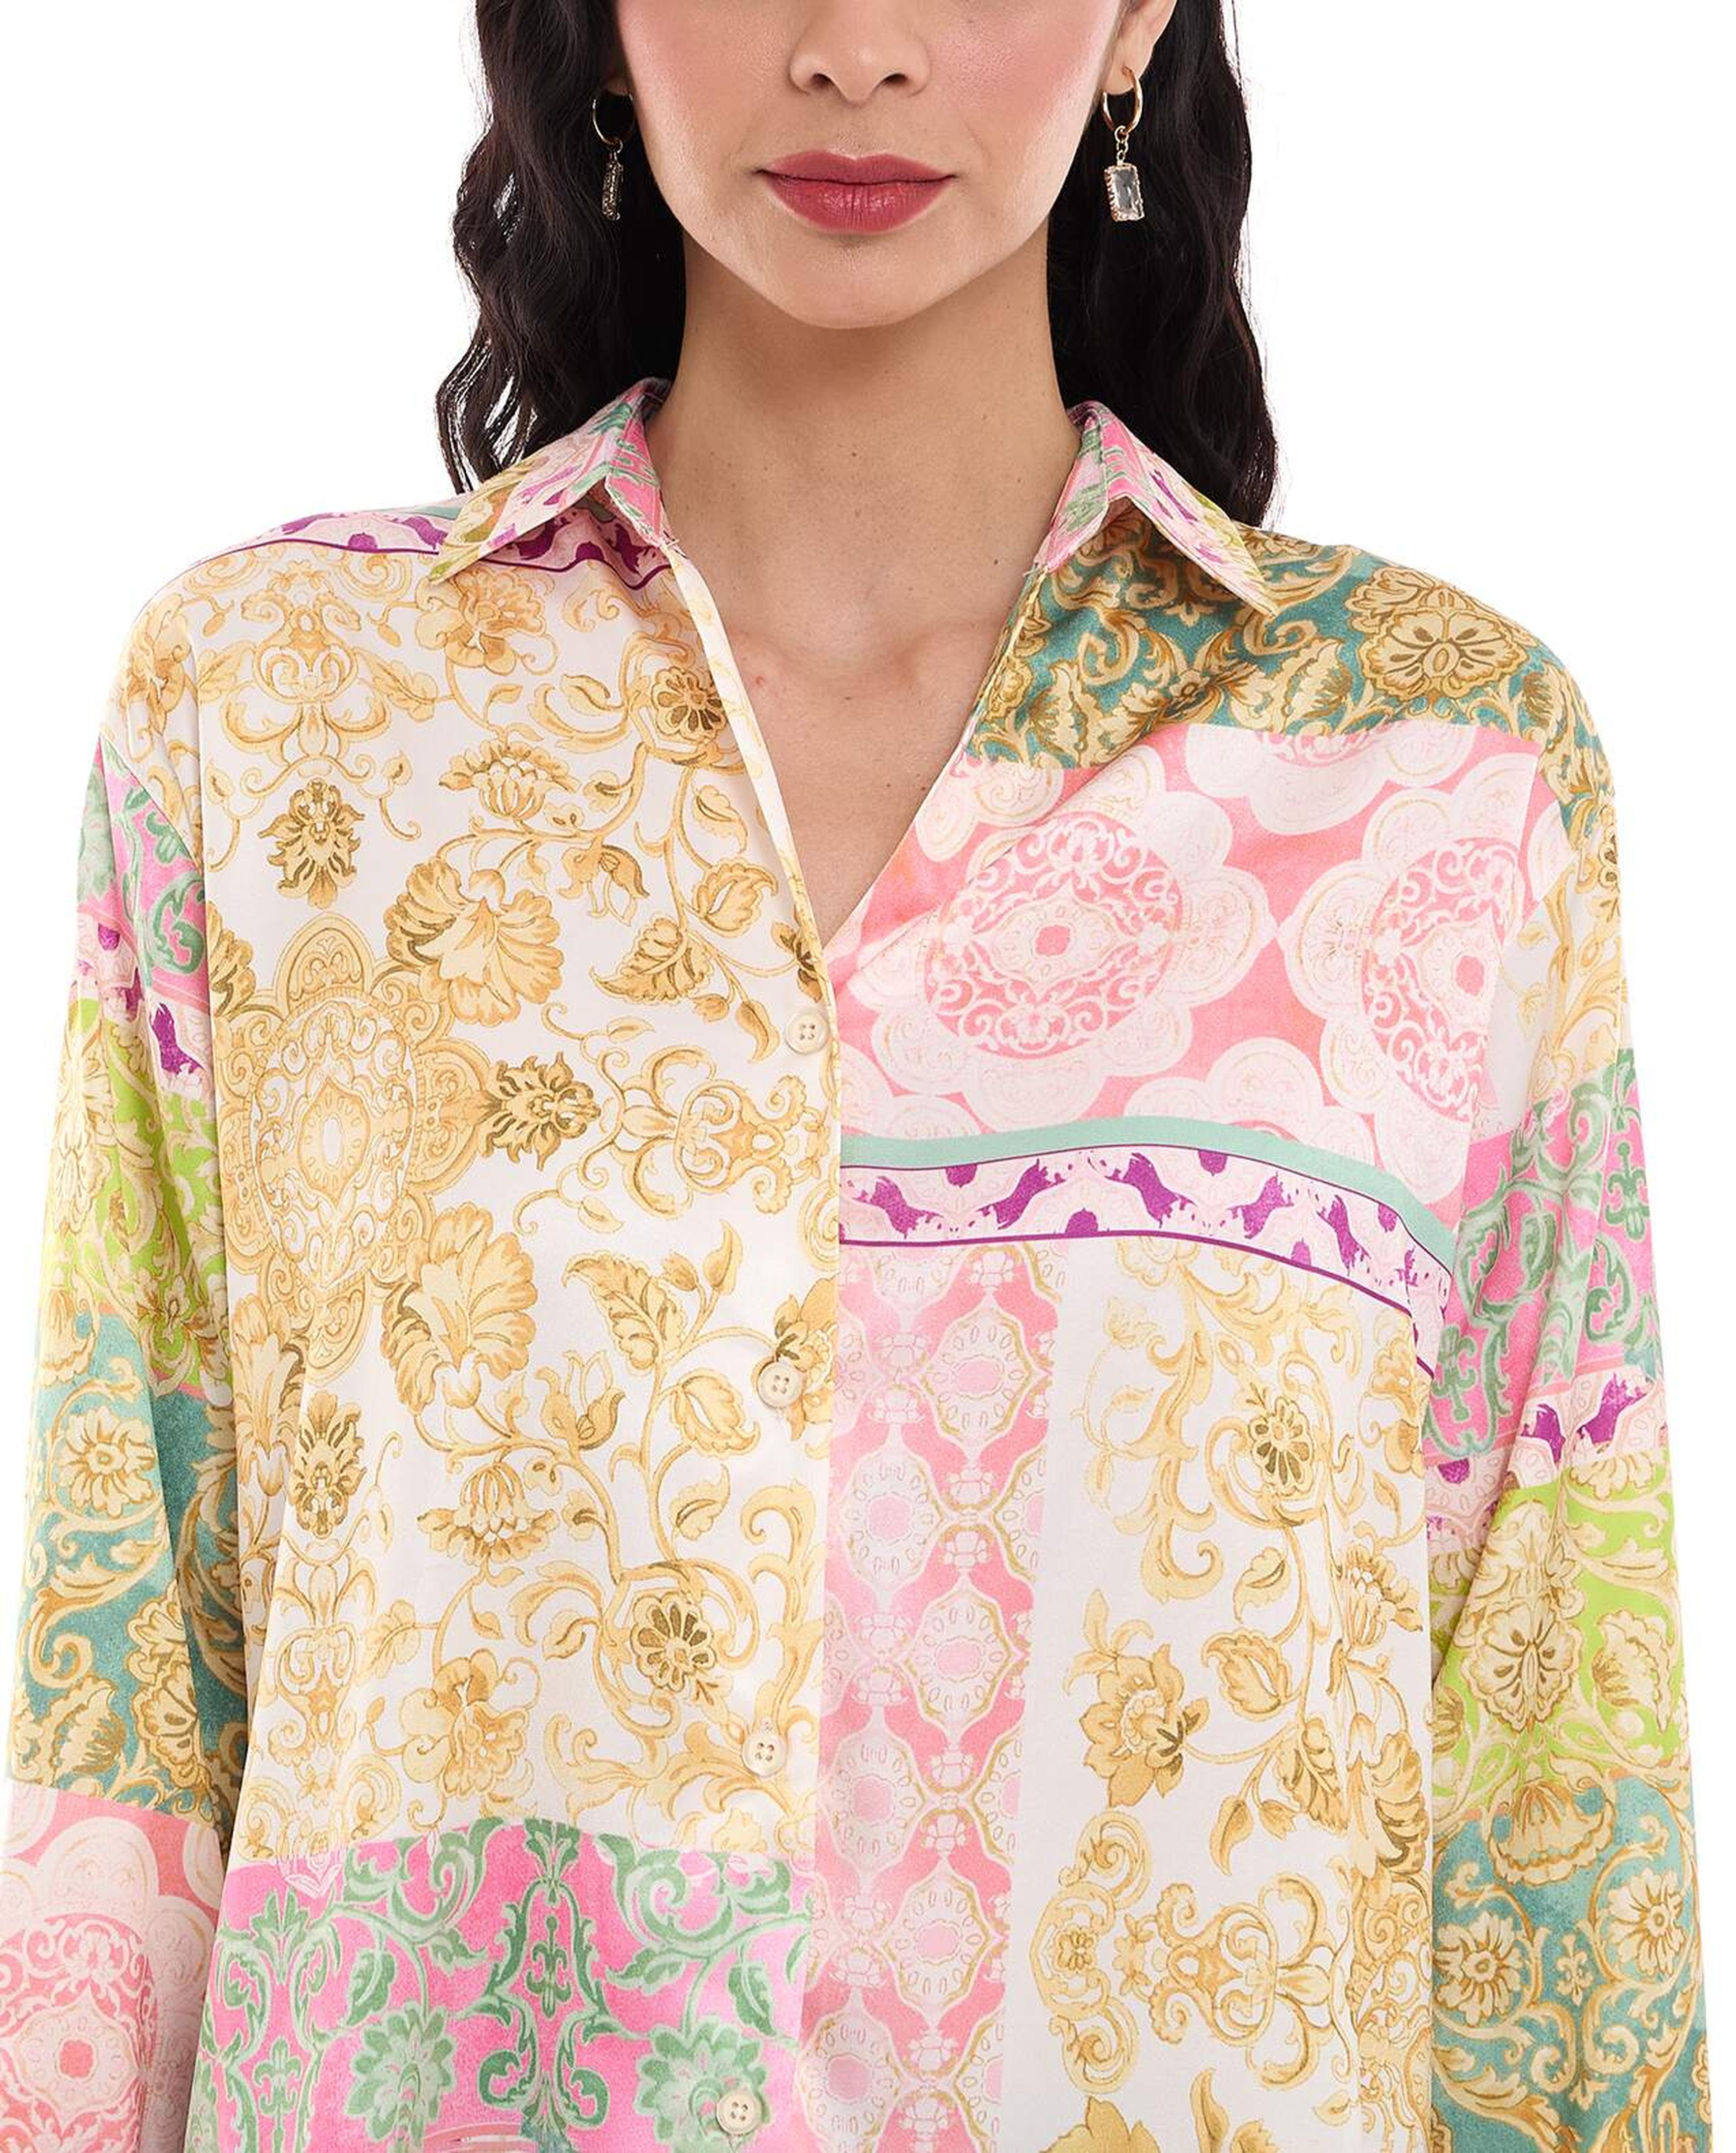 Ethnic Motif Printed Shirt with Classic Collar and Long Sleeves